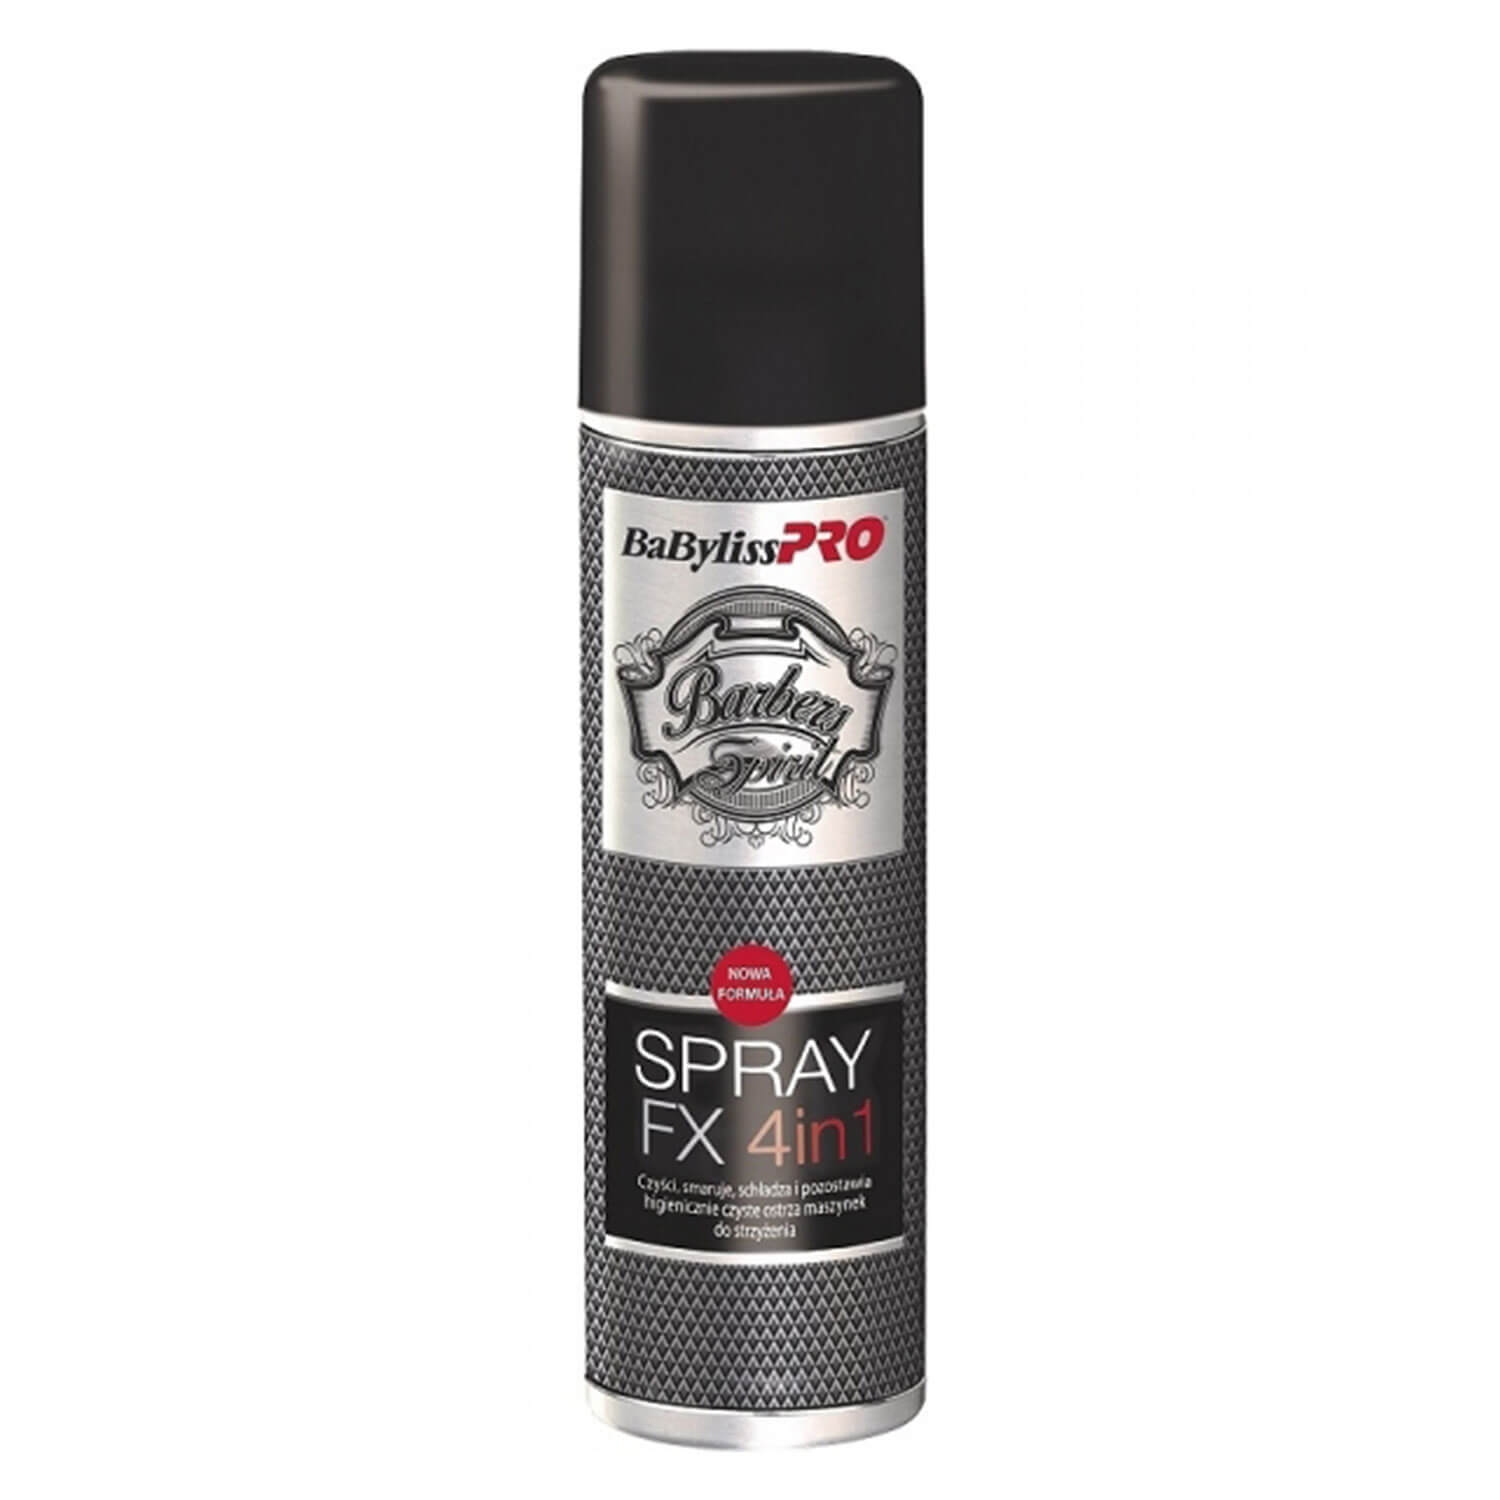 Product image from BaByliss Pro - Spray FX 4in1 FX040290